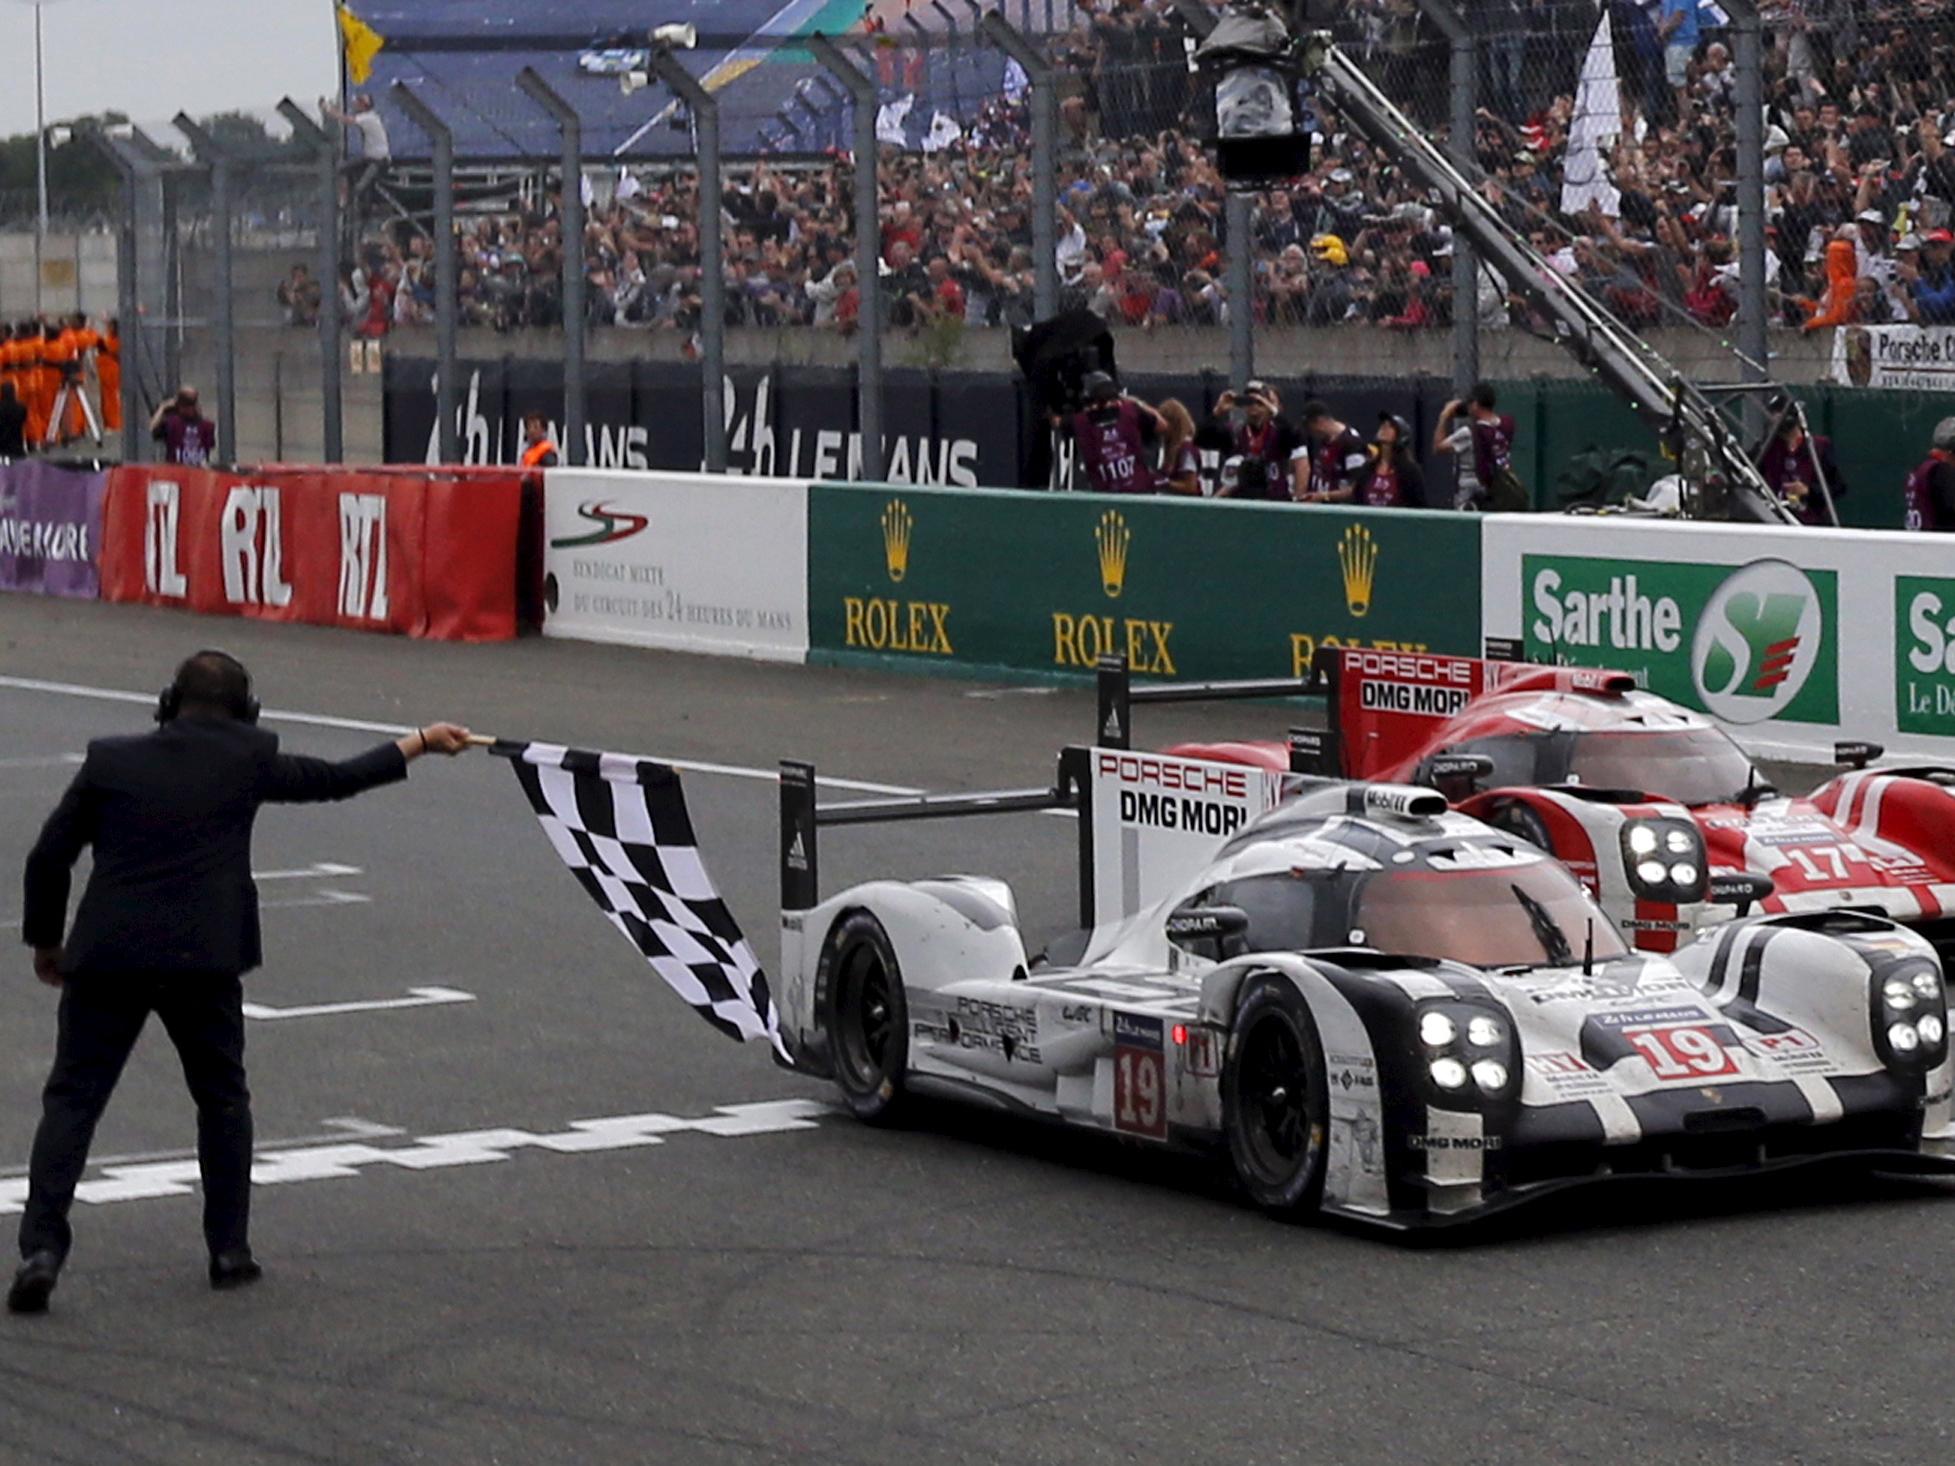 Porsche 919 Hybrid number 19 driver Nico Hulkenberg crosses the finish line to win the Le Mans 24-hour sports car race on 14 June 2015